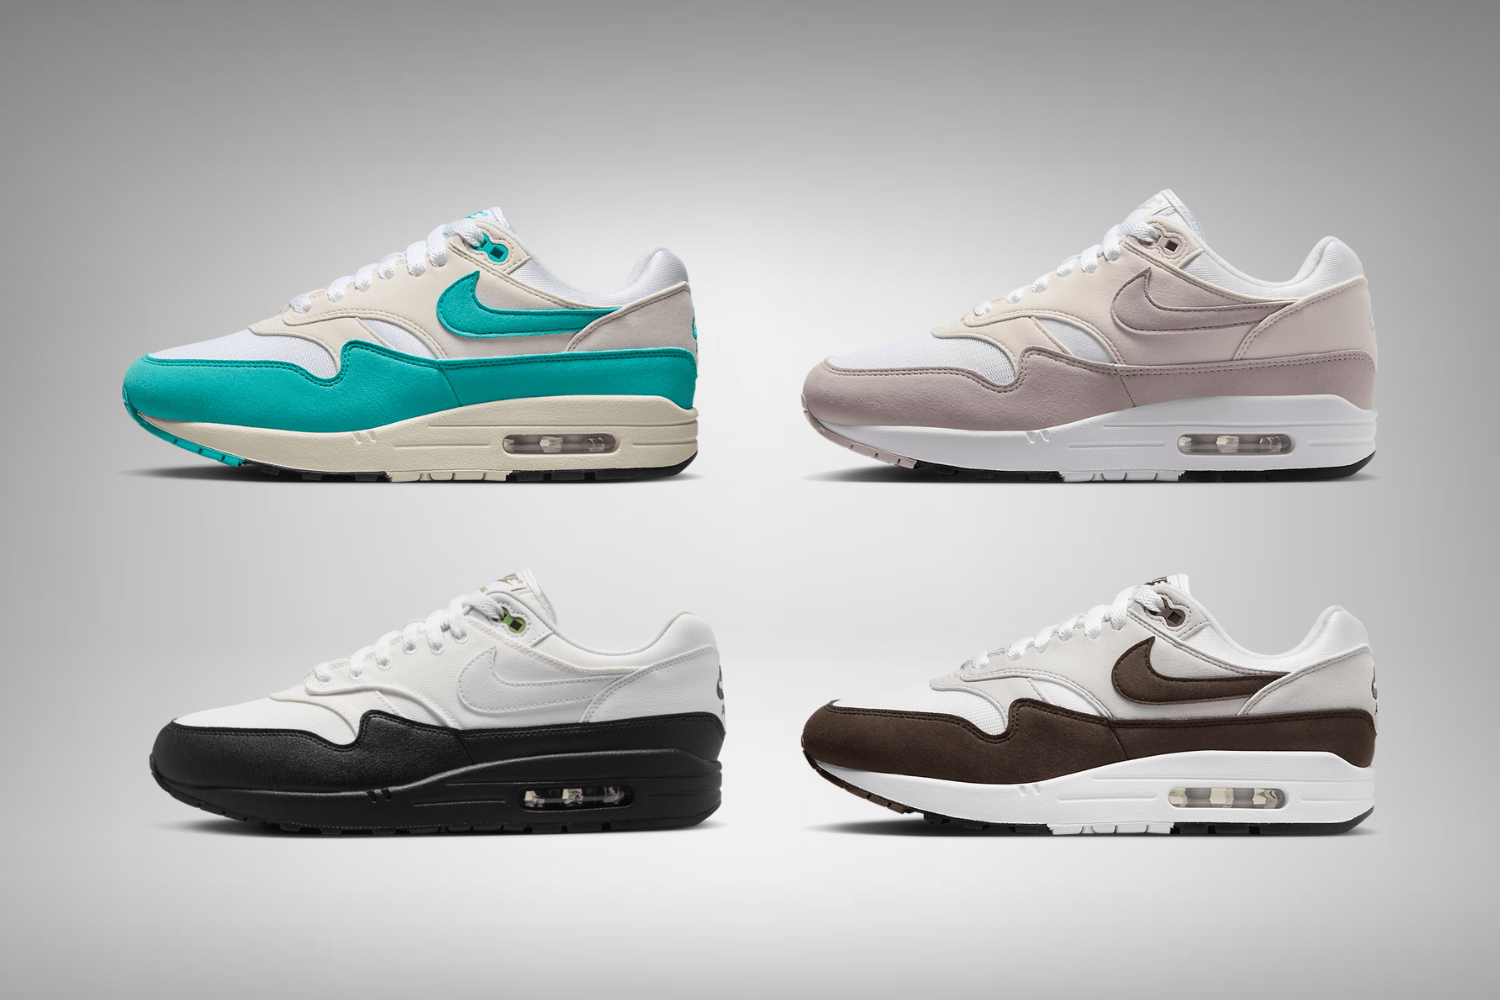 These Nike Air Max 1 releases are expected in 2024